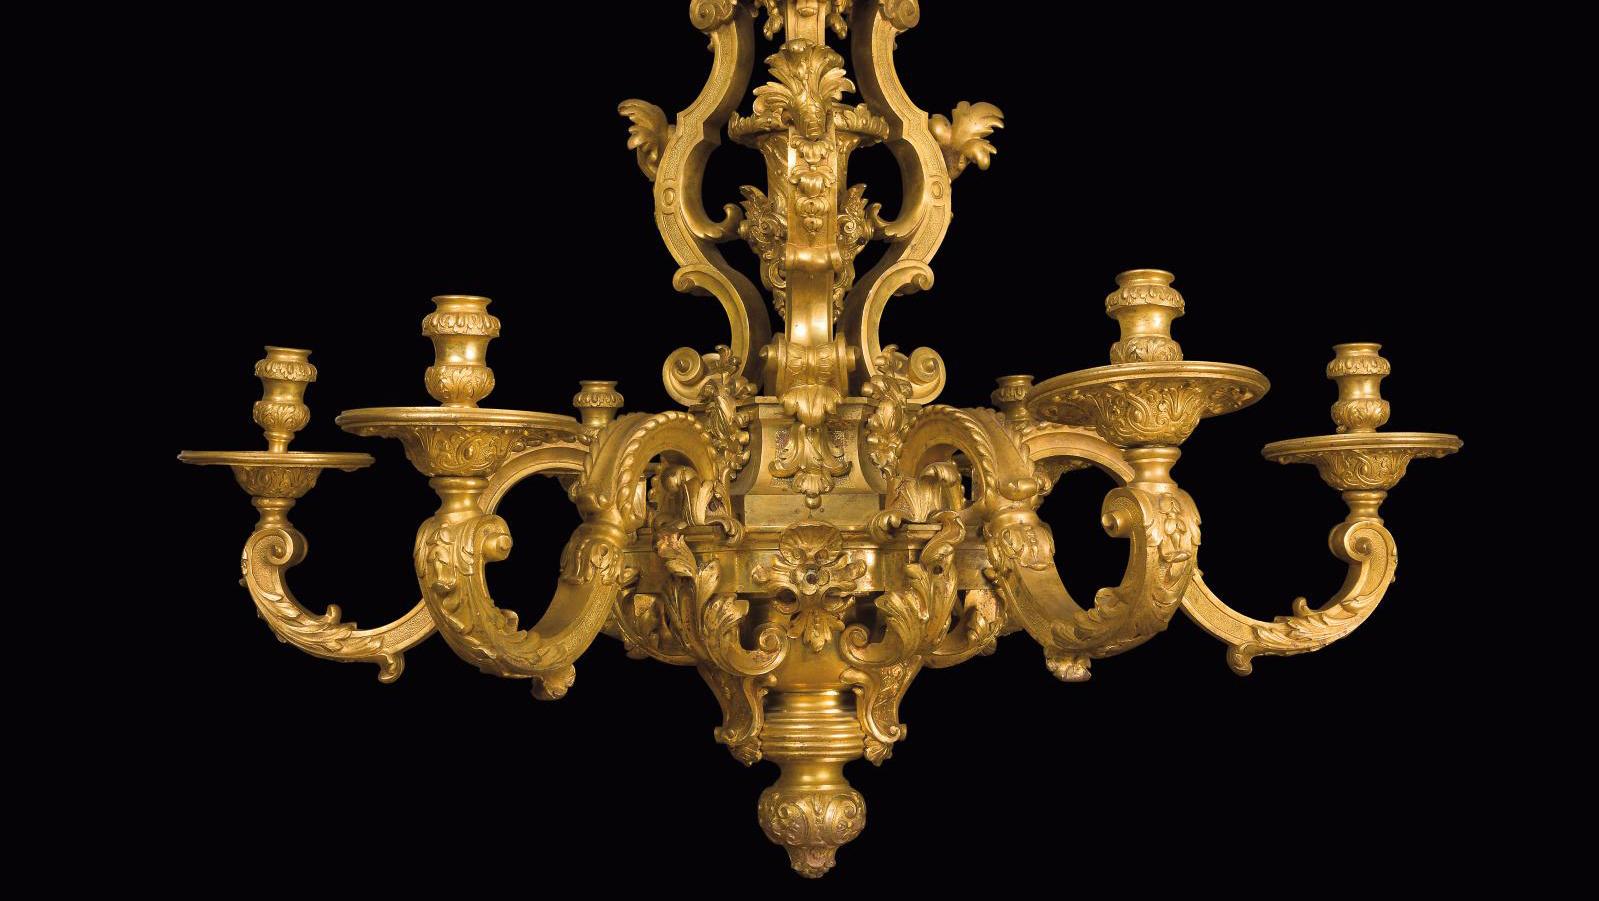 Gilt bronze chandelier with six lights and asymmetrical decoration of foliage, clasps... The Age of Enlightenment Illuminated by a Boulle Chandelier 